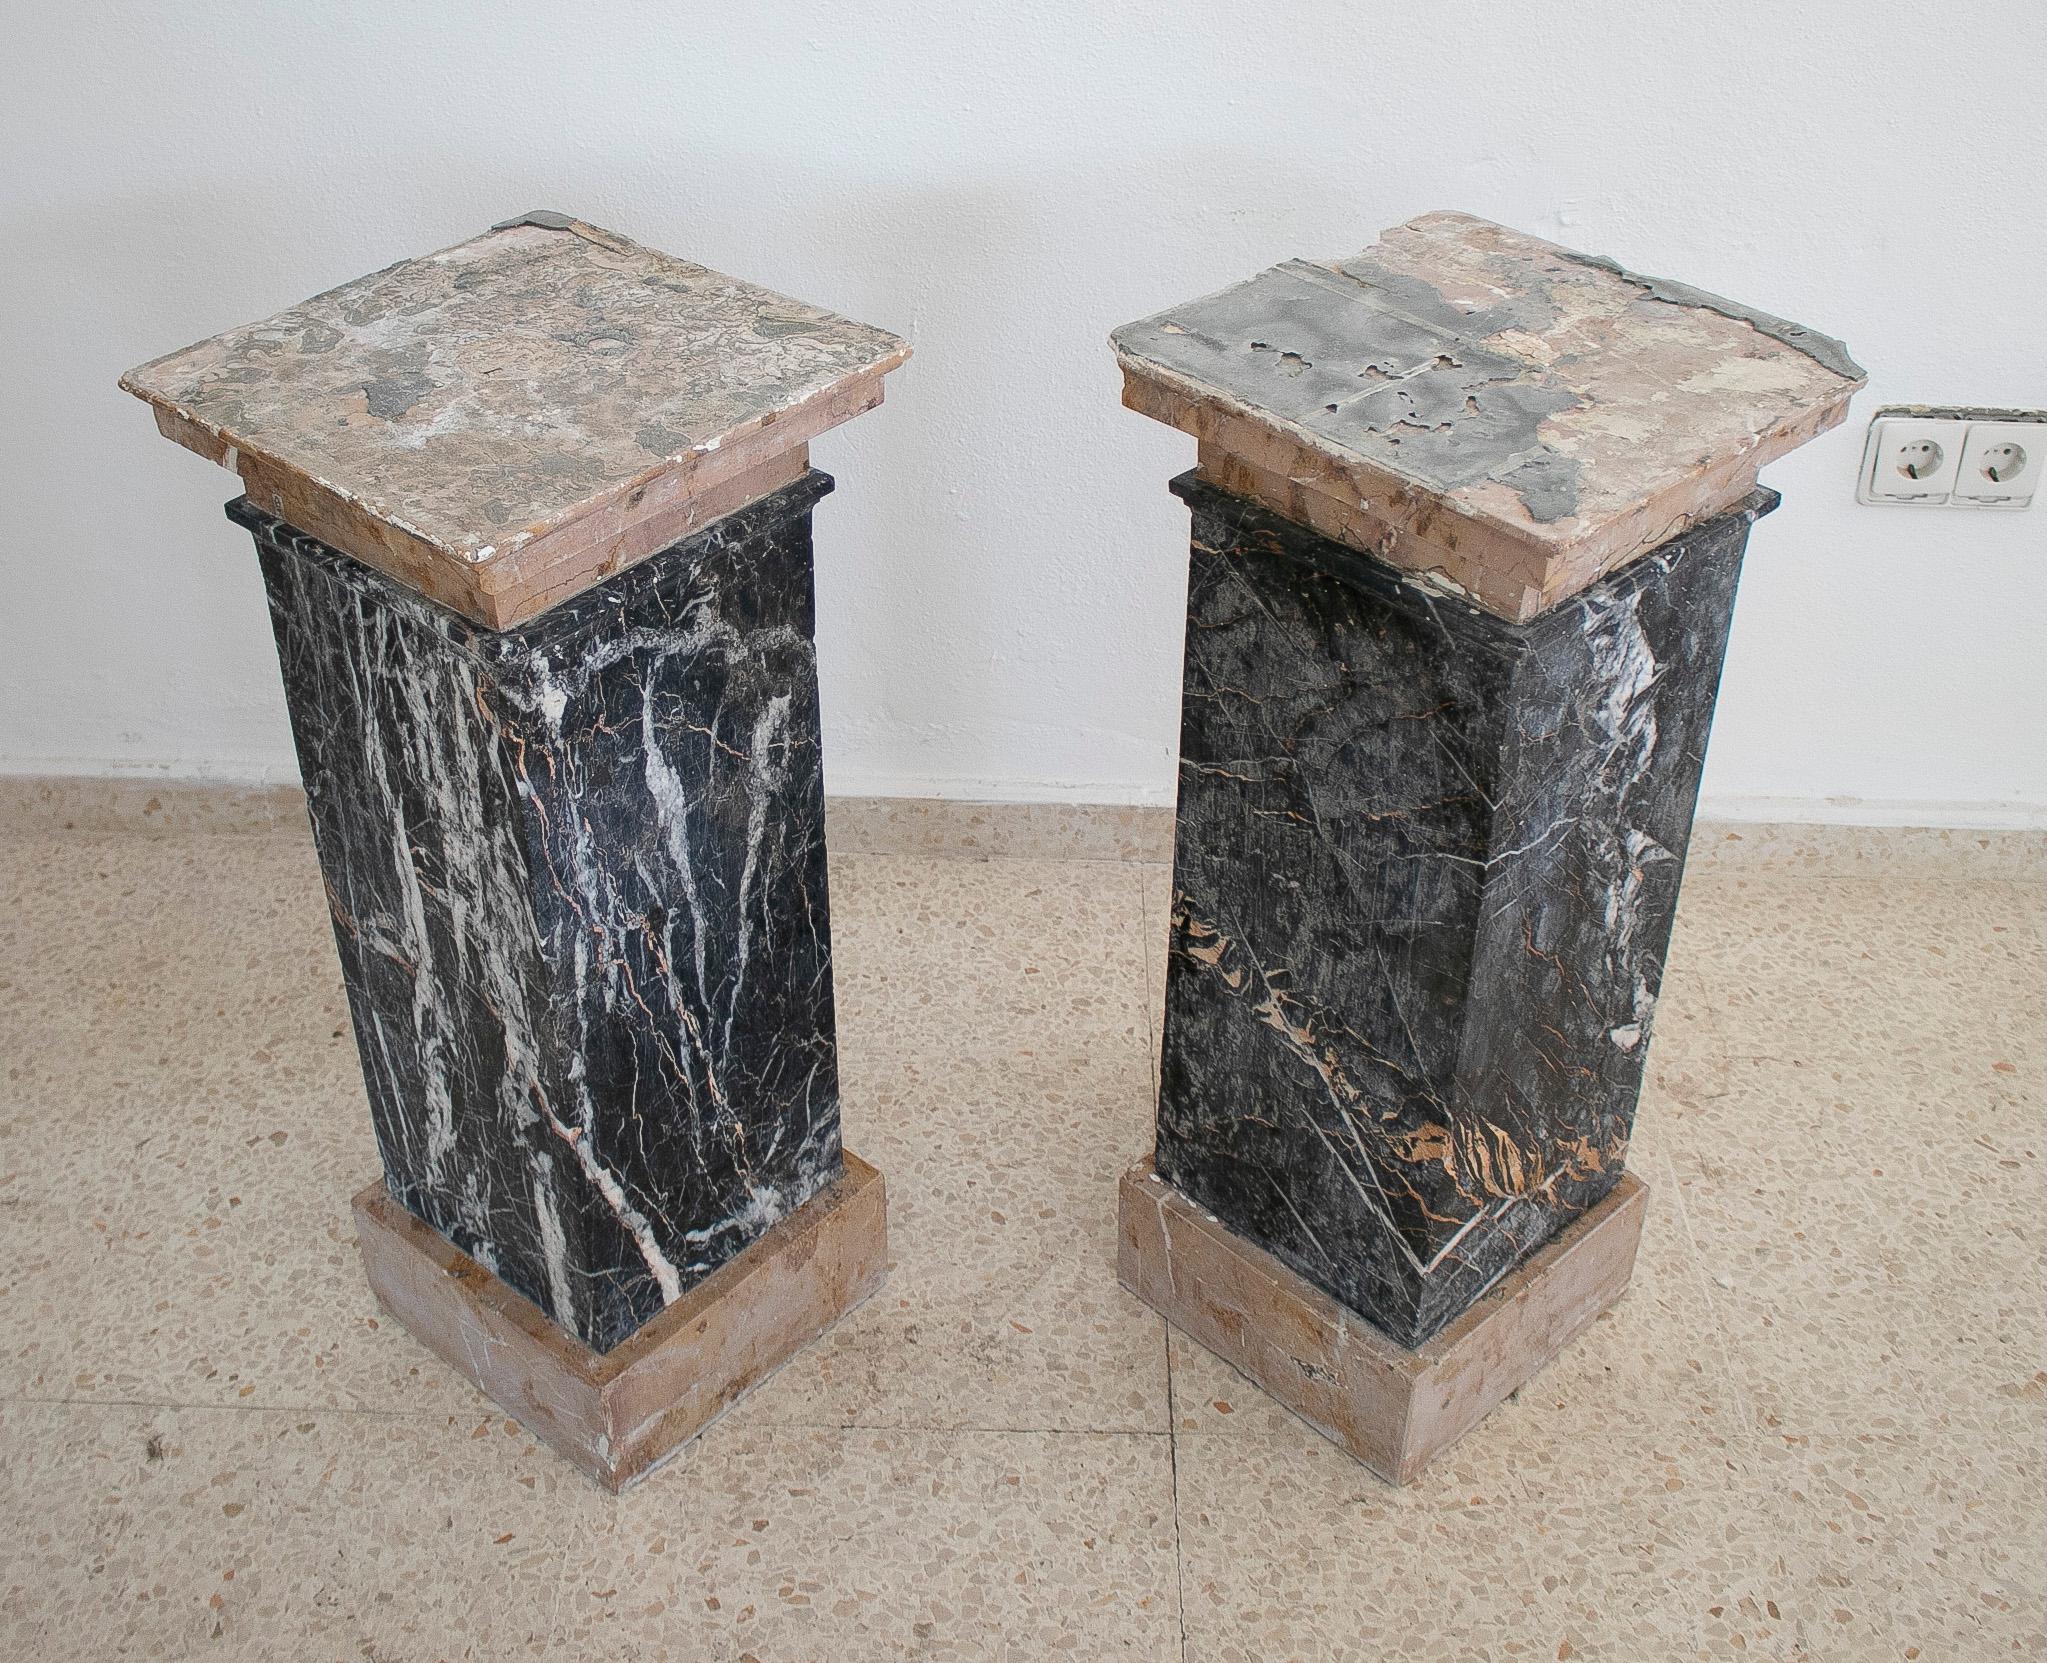 Pair of 1950s Italian classical square pedestal bases with bases and capitals in a Levanto Rosso light red marble and the shaft in a strongly white veined black marble.